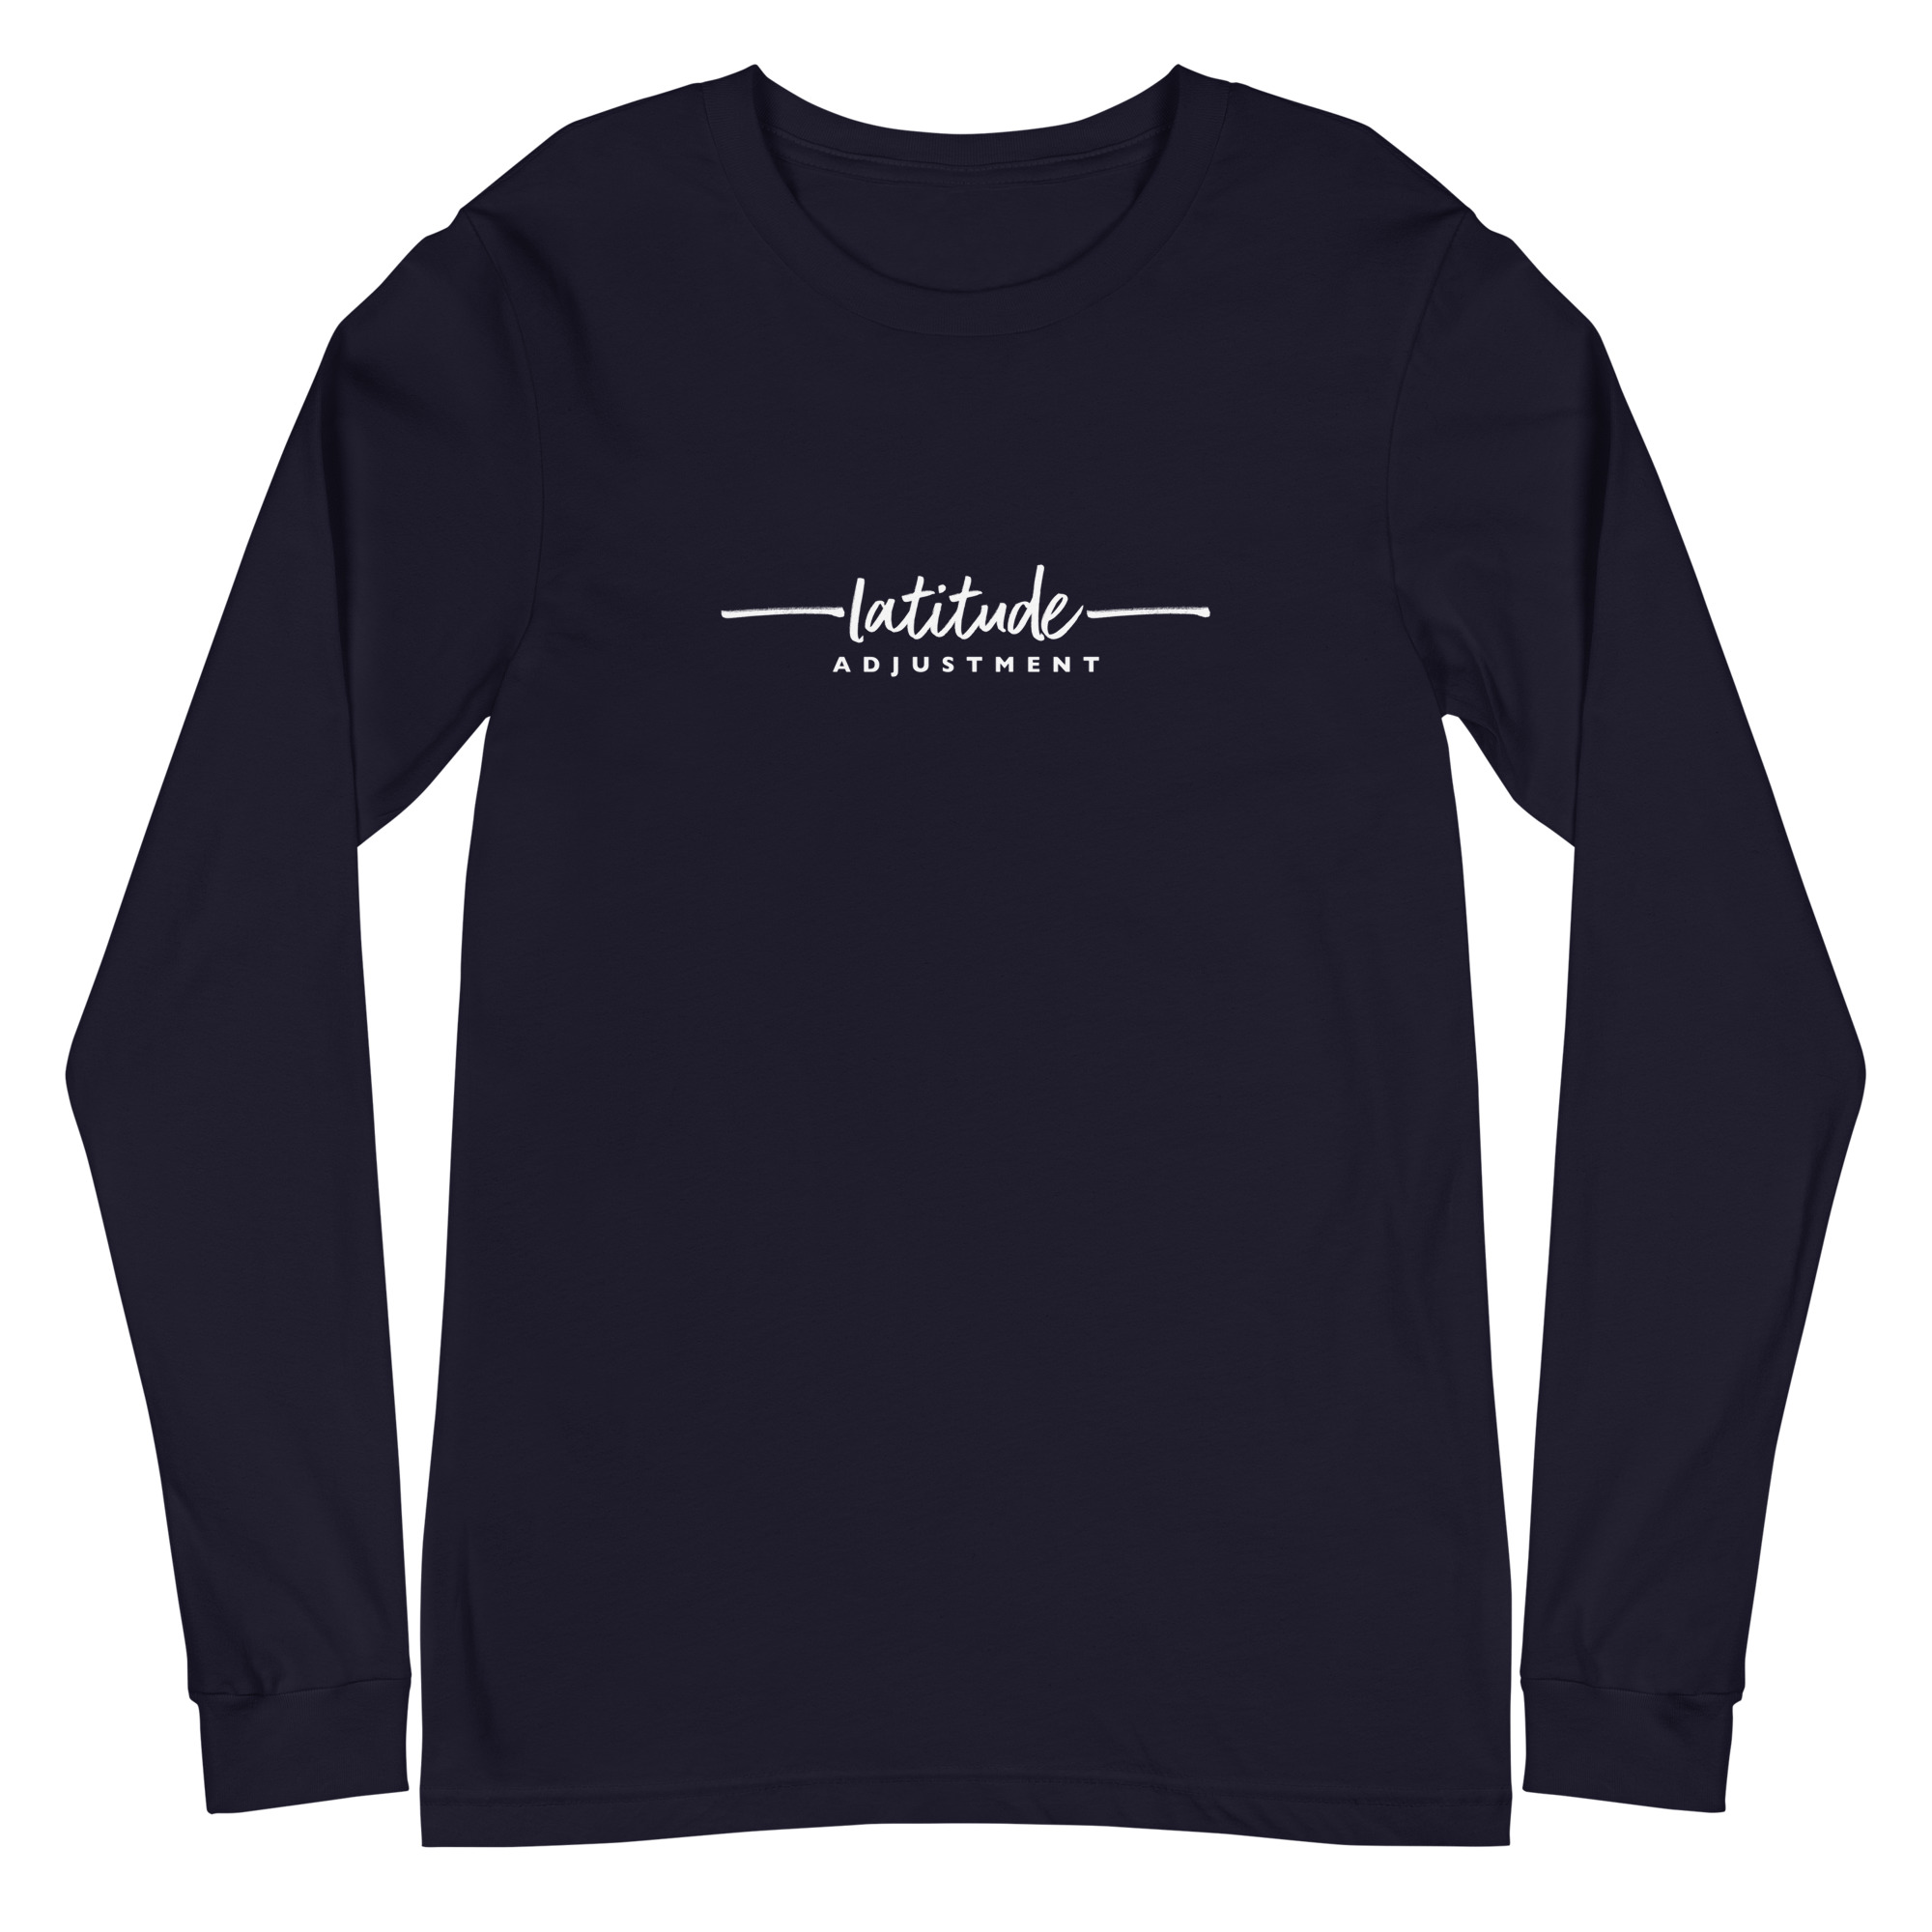 Latitude Adjustment Unisex Long Sleeve Tee in navy from Wander with Direction